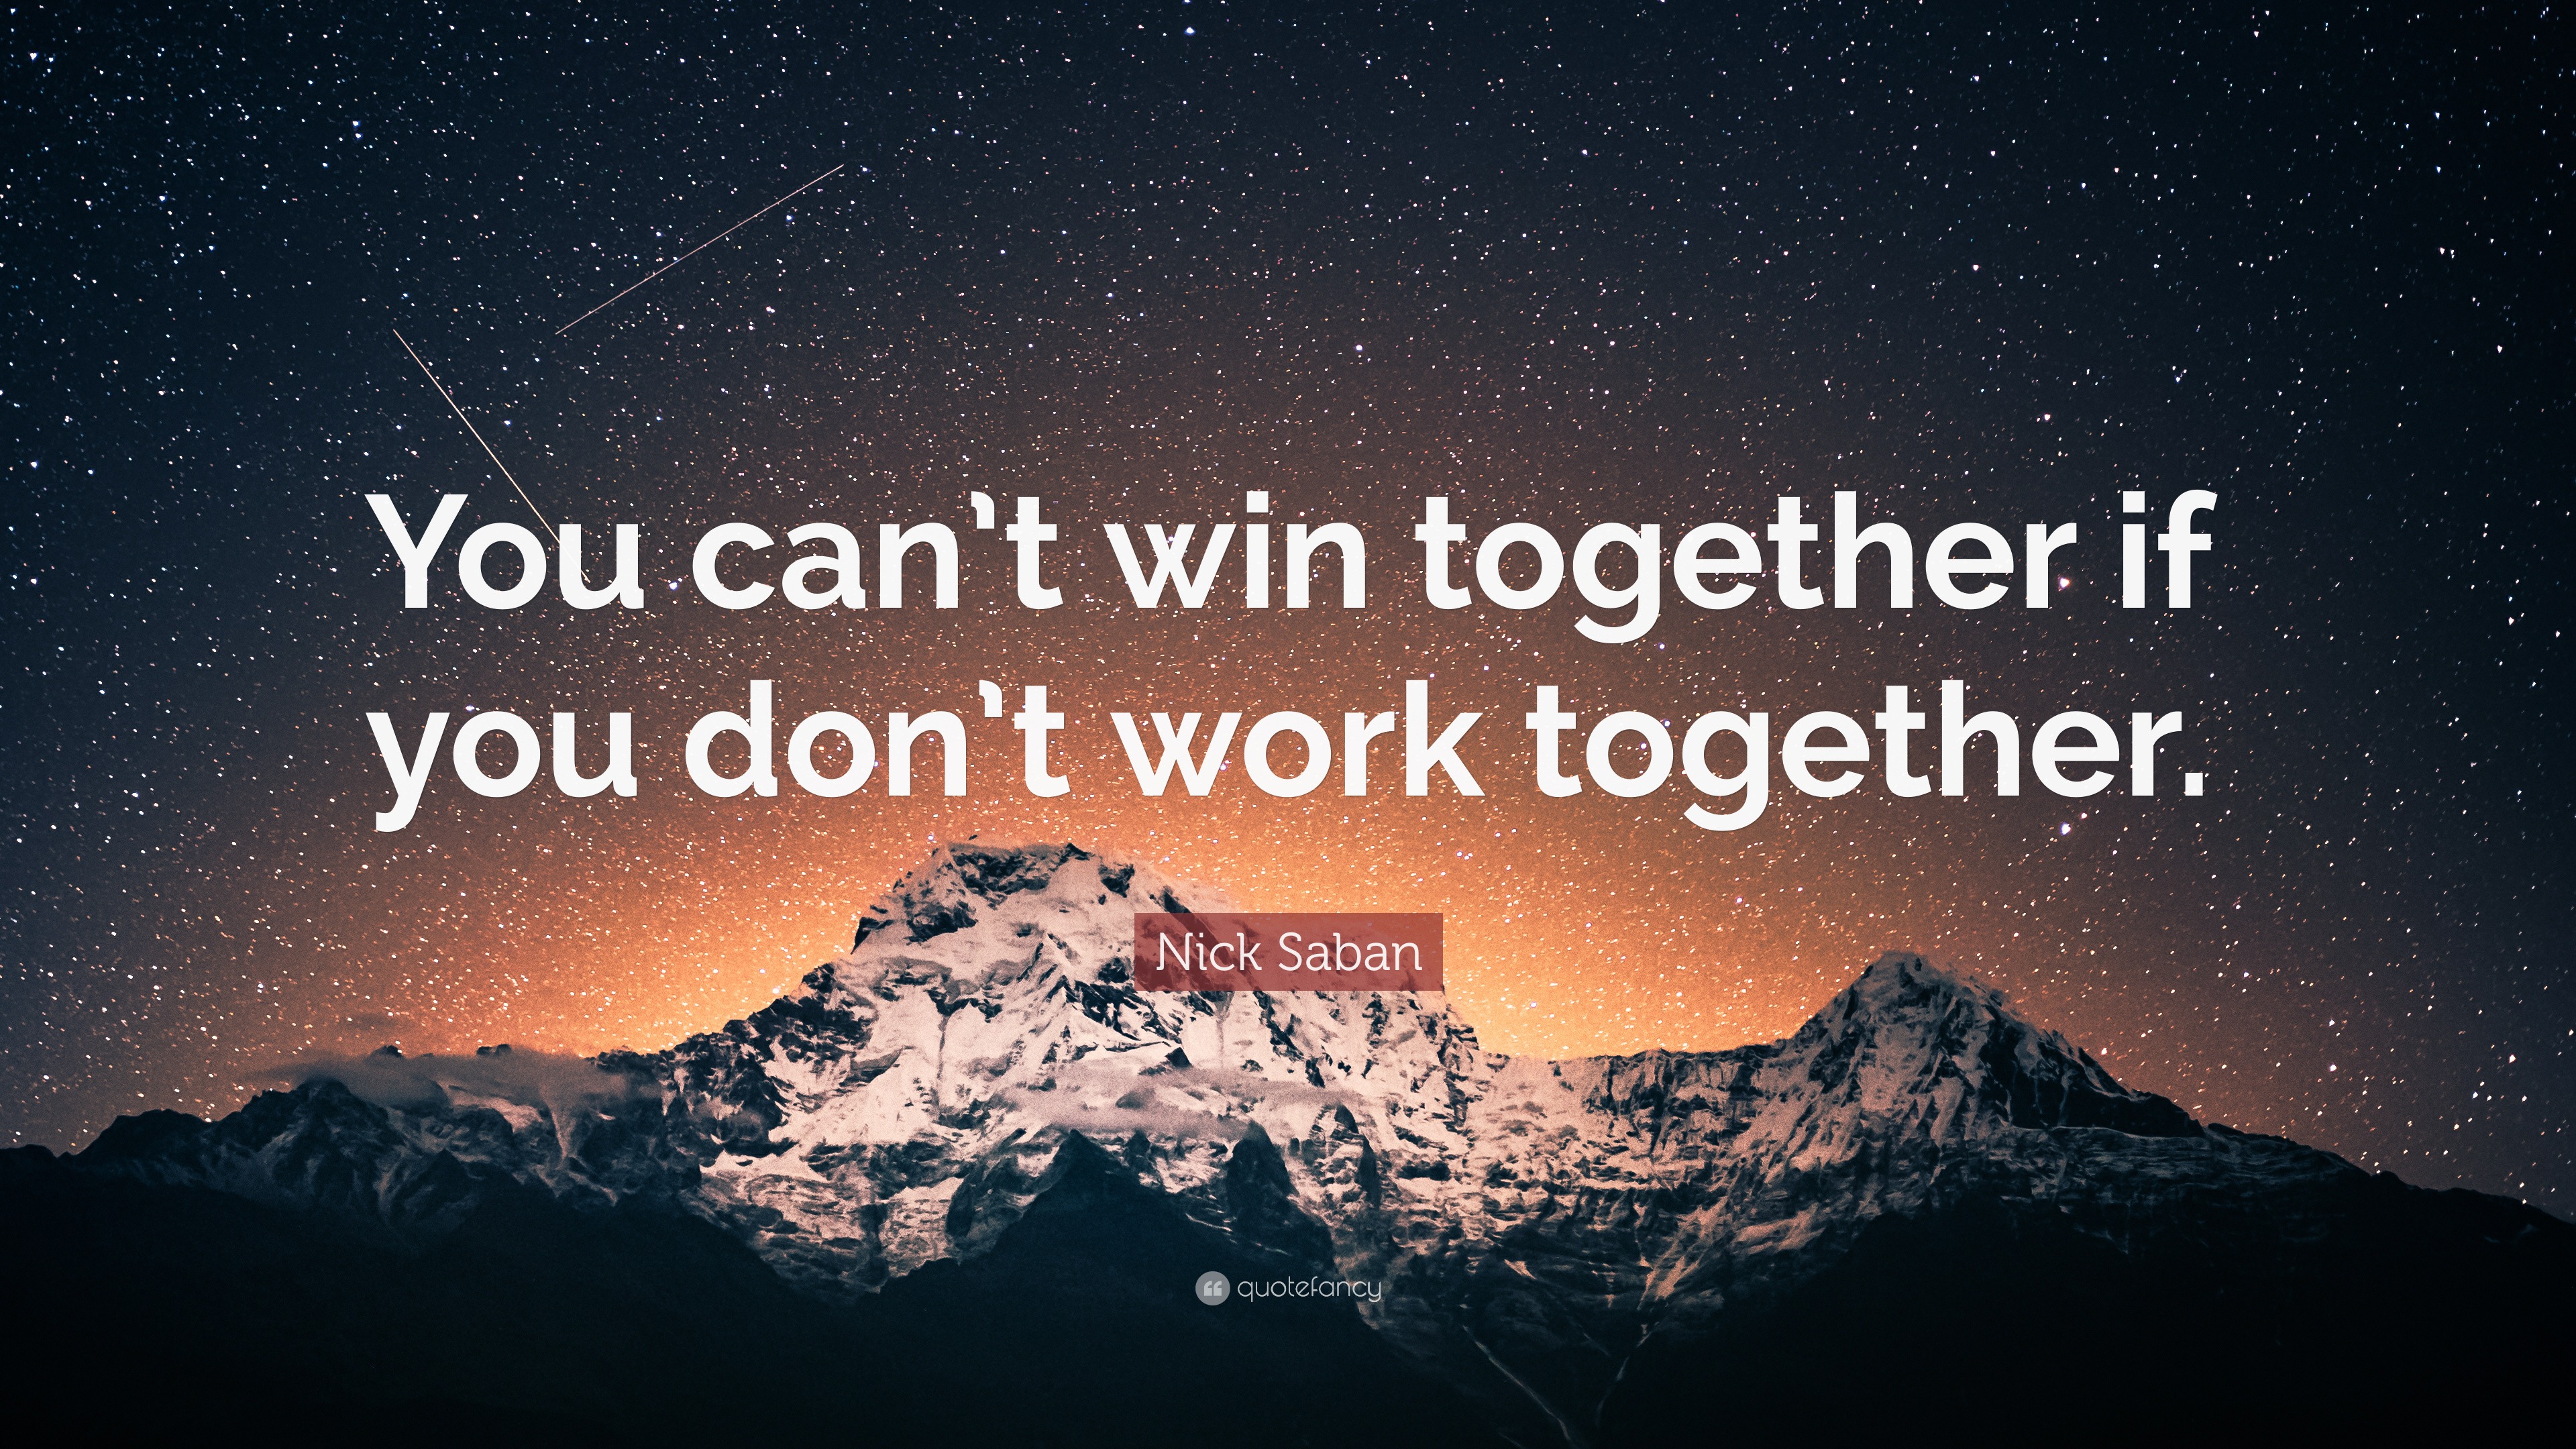 Nick Saban Quote: “You can’t win together if you don’t work together